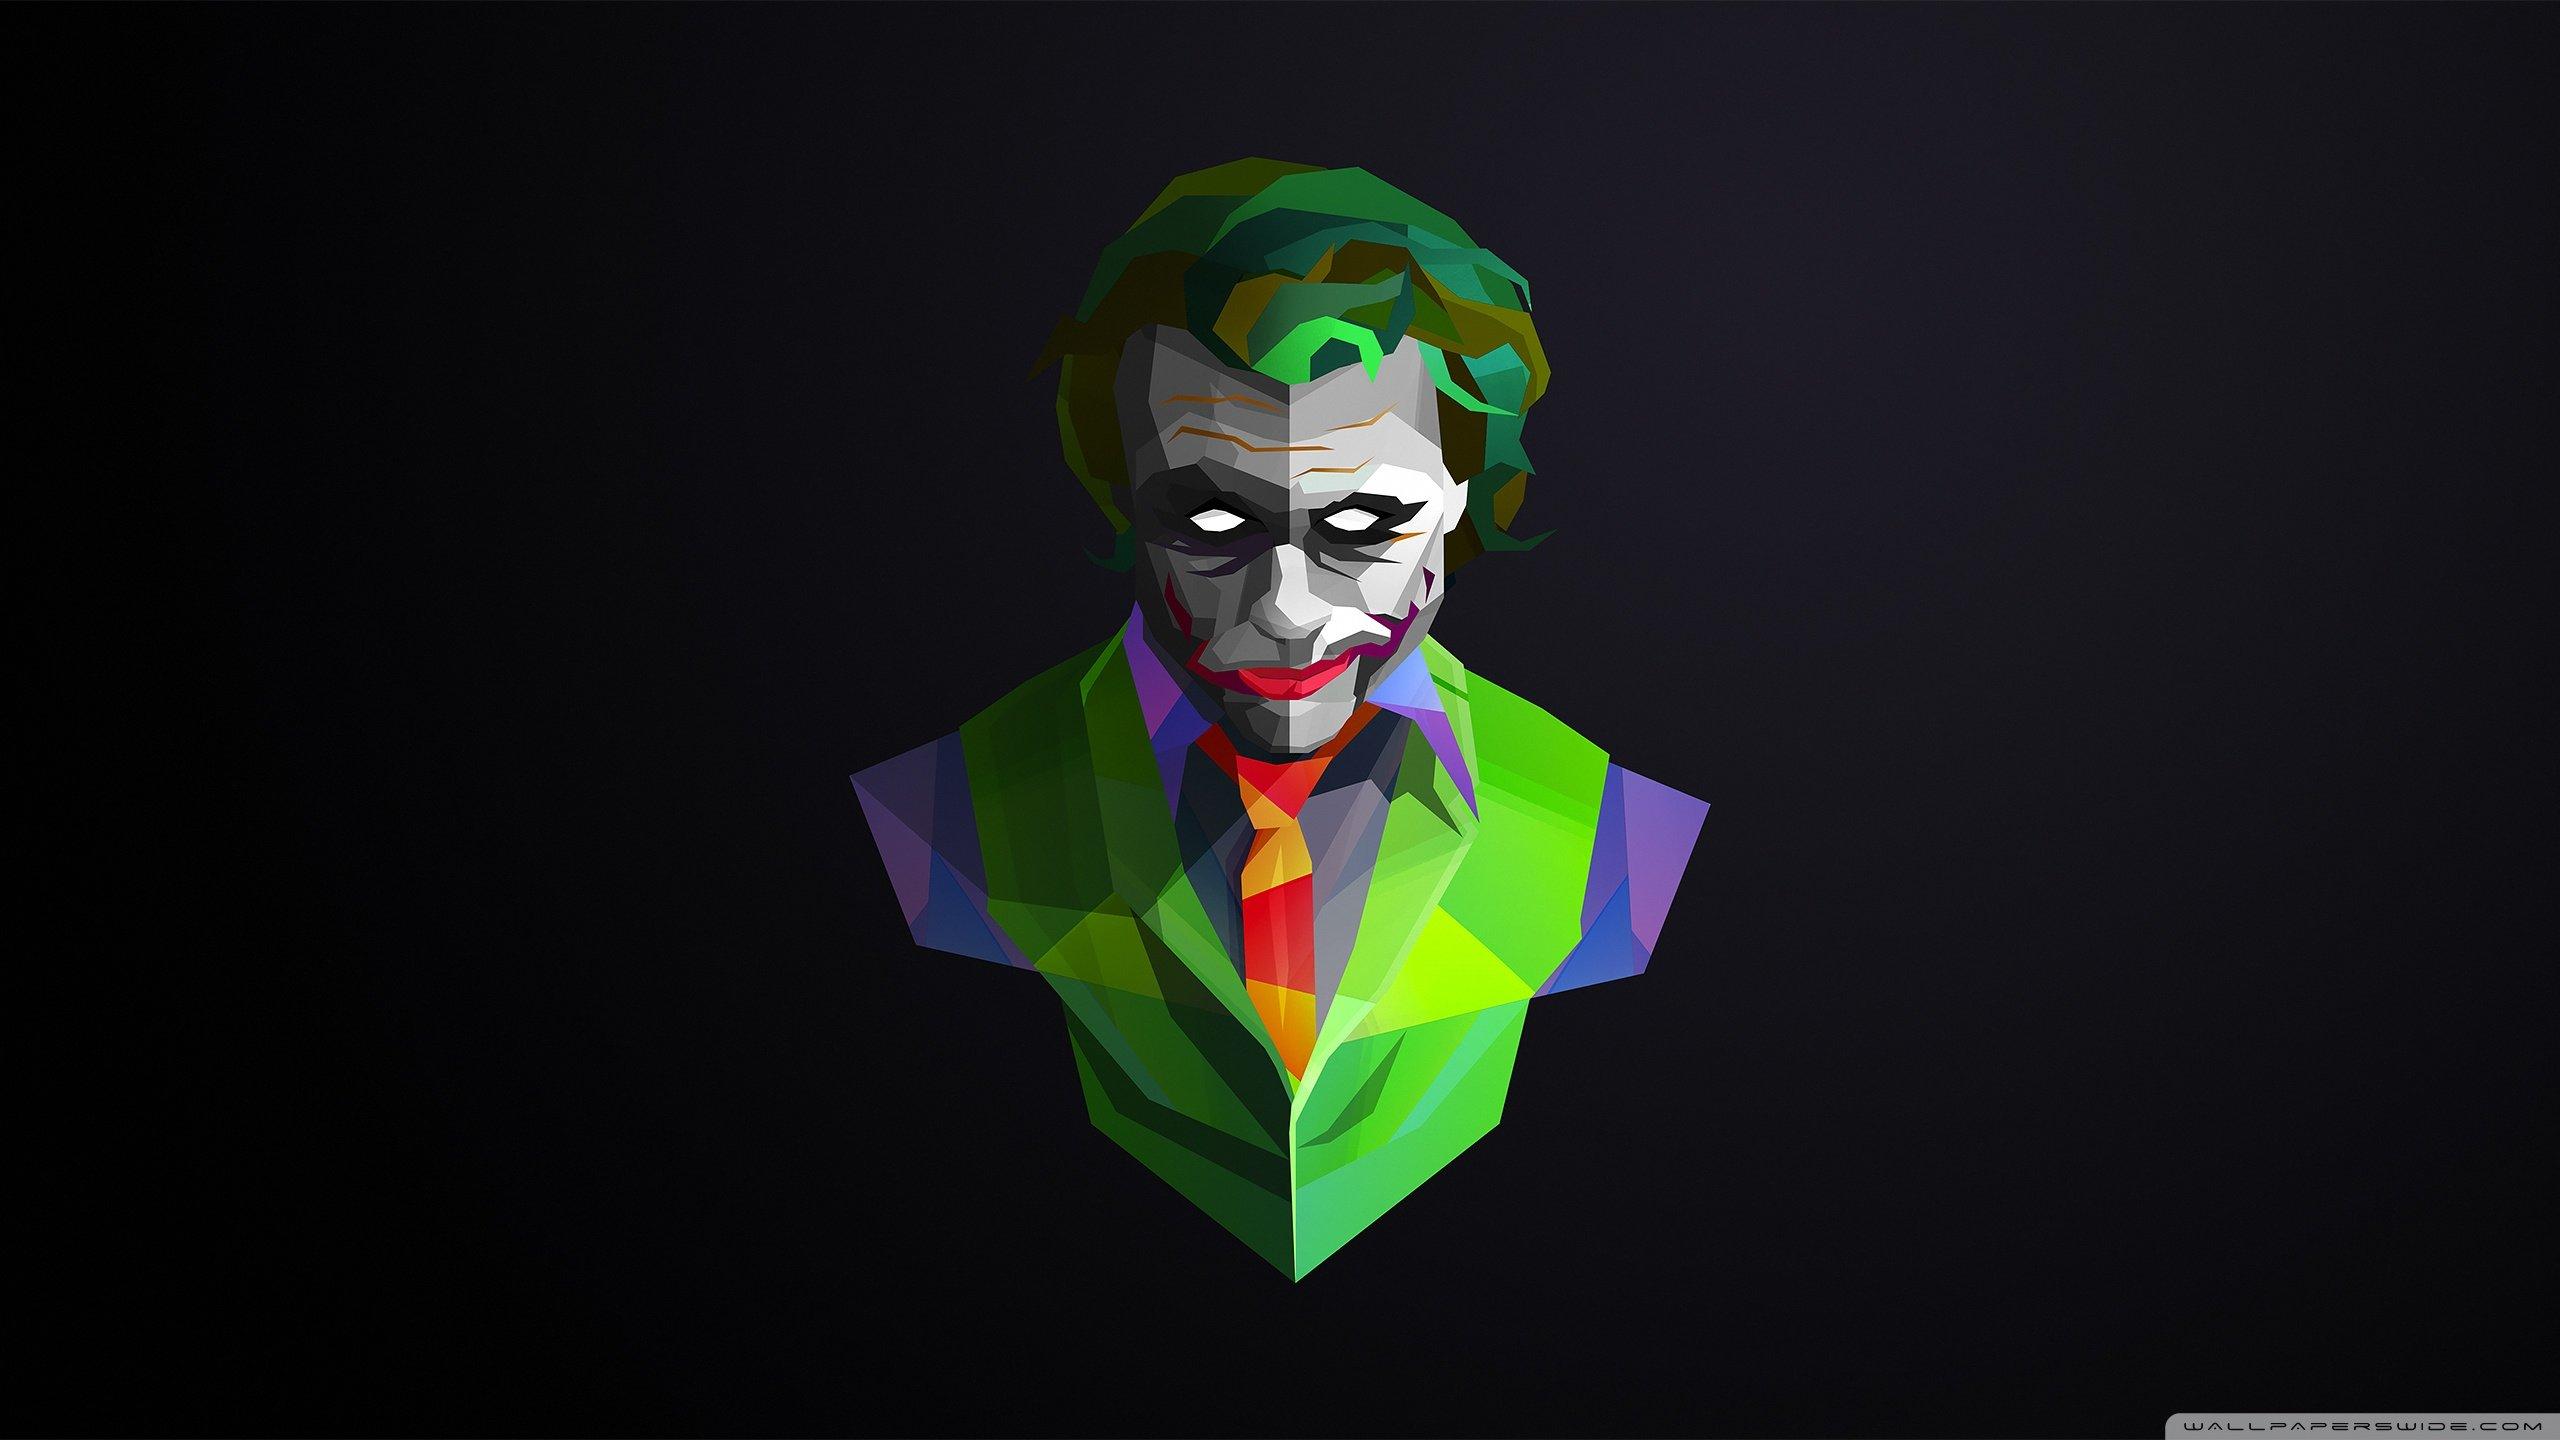 Joker 4K wallpaper for your desktop or mobile screen free and easy to download